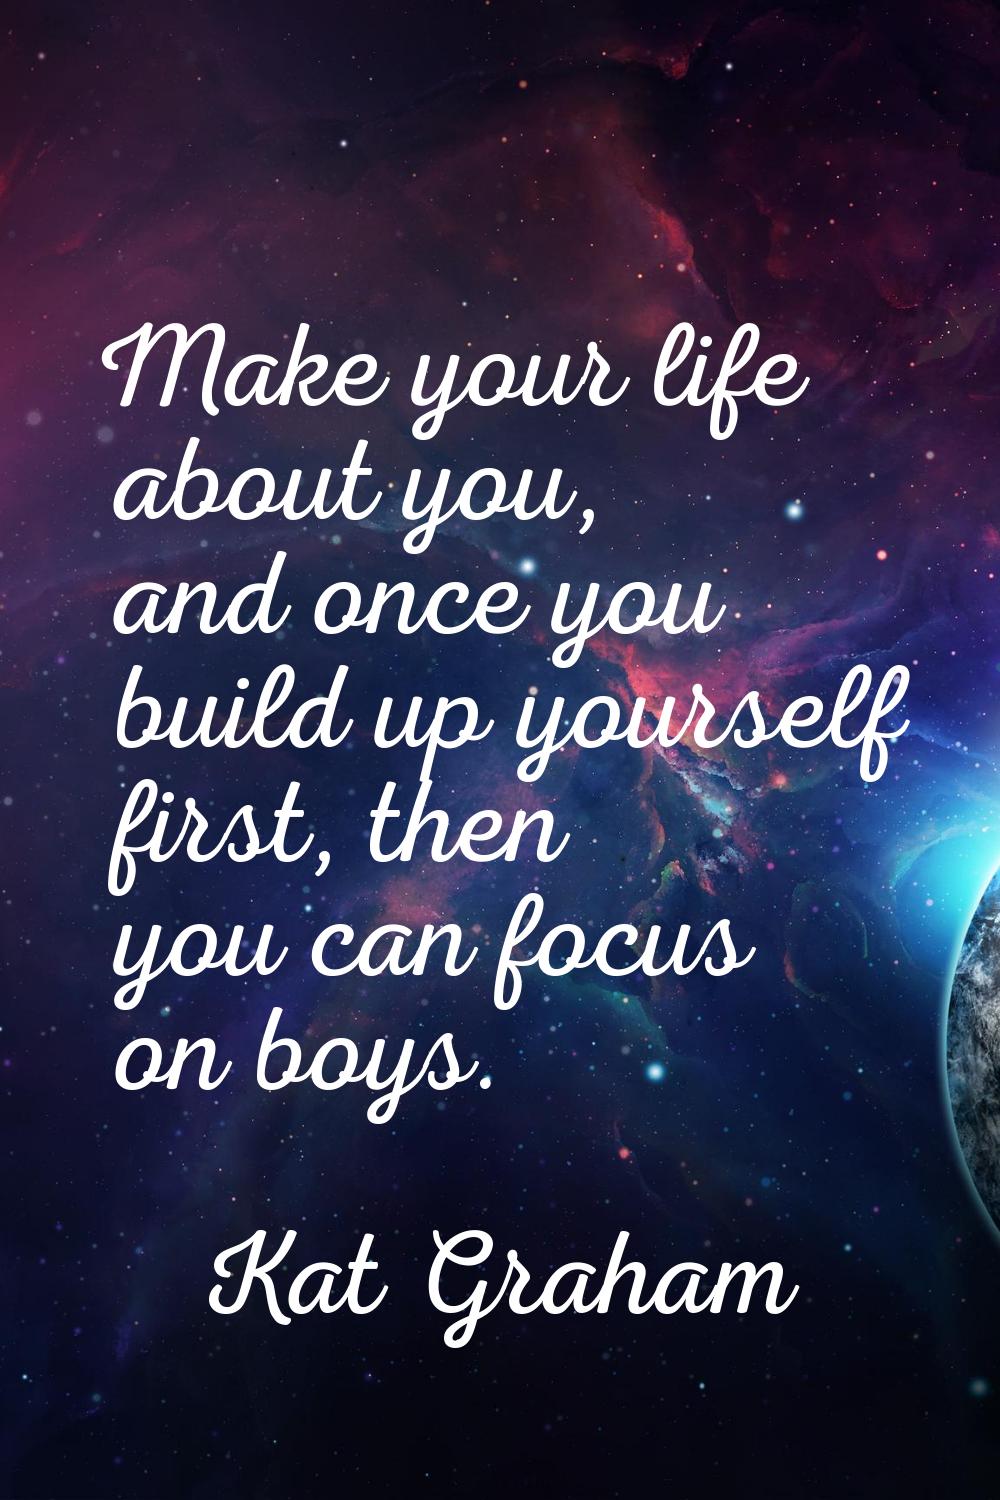 Make your life about you, and once you build up yourself first, then you can focus on boys.